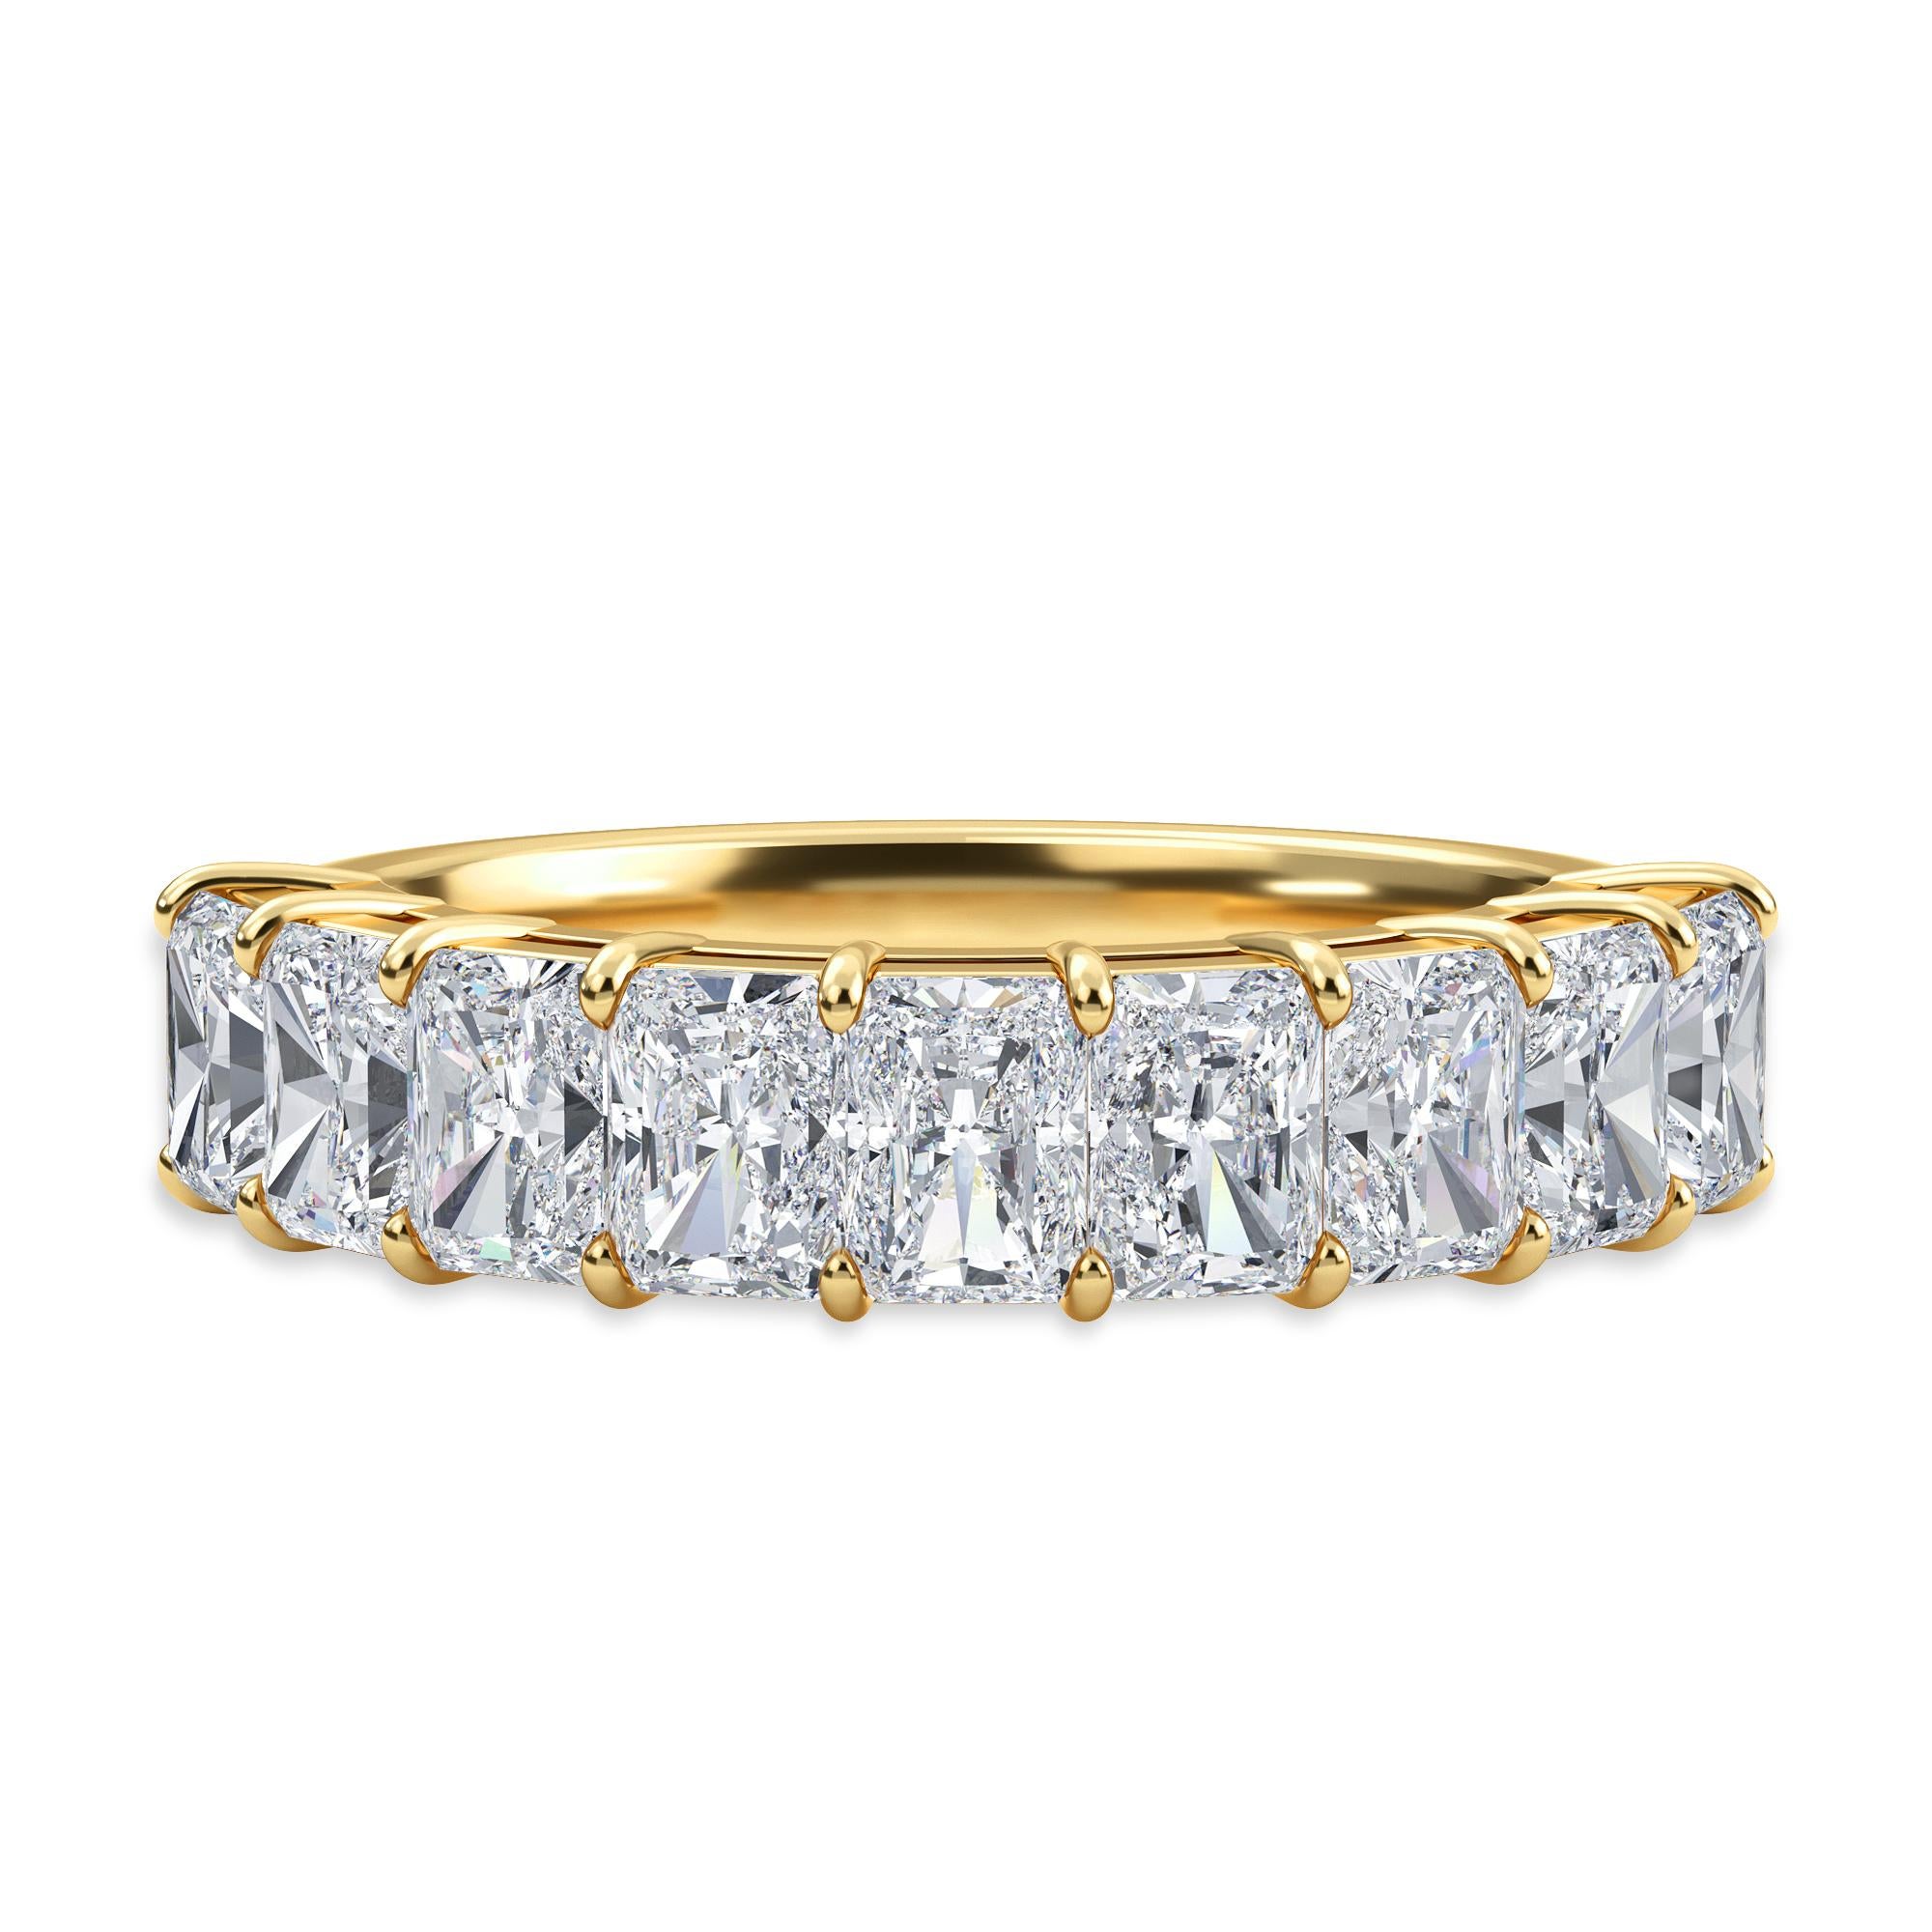 This Radiant Diamond Partway Band features 9 Radiant Diamonds and weights 1.35 Total Carat Weight. These Radiant diamonds are F Color and VS Clarity, and are extremely elongated. This ring is set in 18K Yellow Gold in a finger size 6.5. 